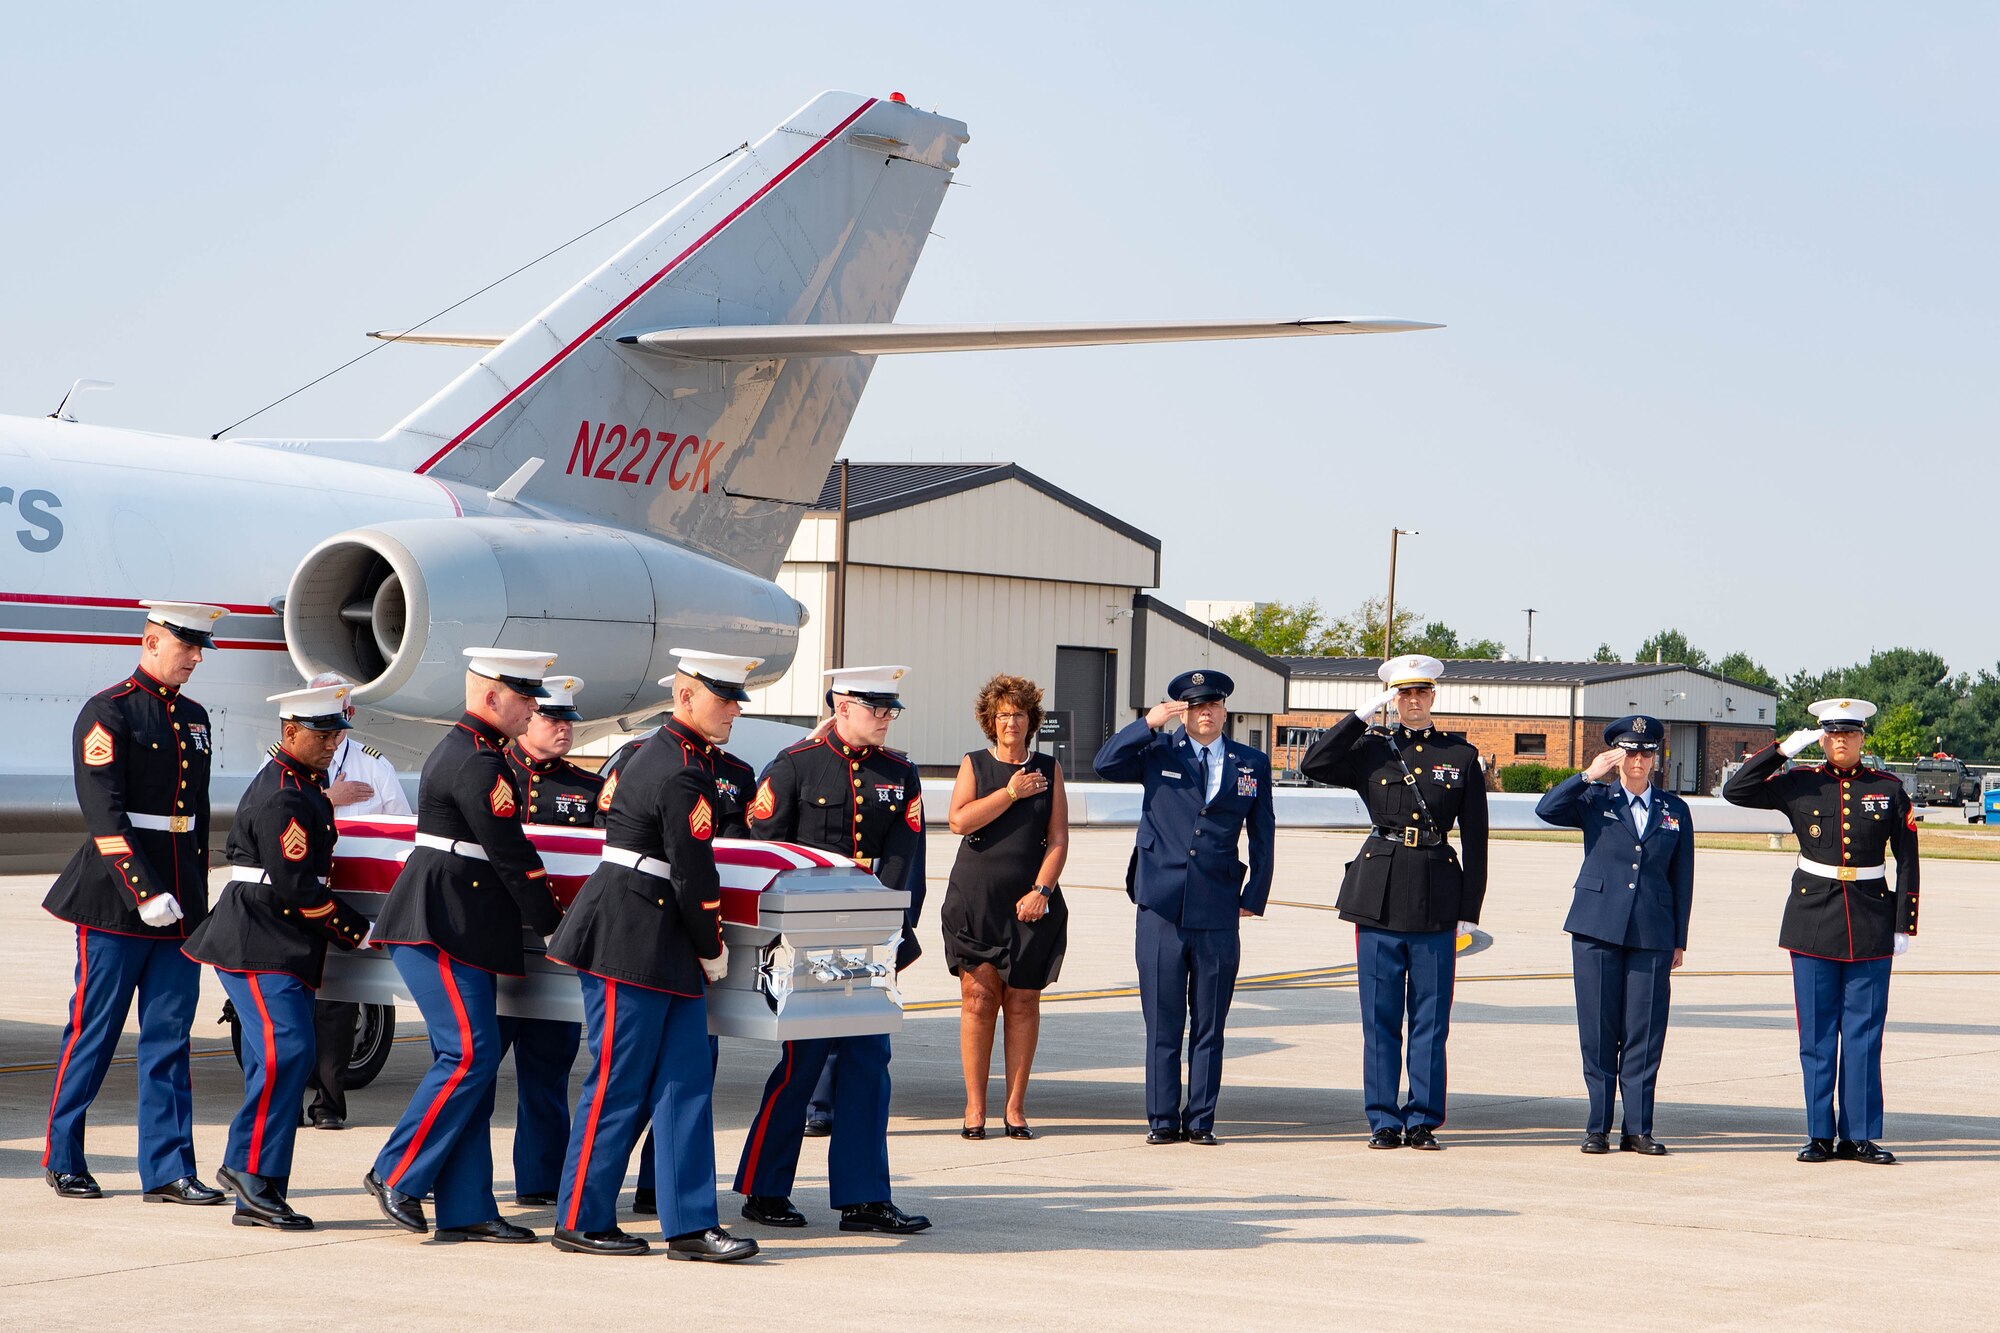 Marines from Detachment 1, Communications Company, Combat Logistics Regiment 45, 4th Marine Logistics Group, carry the casket of U.S. Marine Corps Cpl. Humberto A. Sanchez of Logansport, Indiana, Sept. 12, 2021 at Grissom Air Reserve Base, Indiana. Sanchez was assigned to 2nd Battalion, 1st Marine Regiment, 1st Marine Division, I Marine Expeditionary Force, Camp Pendleton, California. (U.S. Air Force photo by Master Sgt. Benjamin Mota)